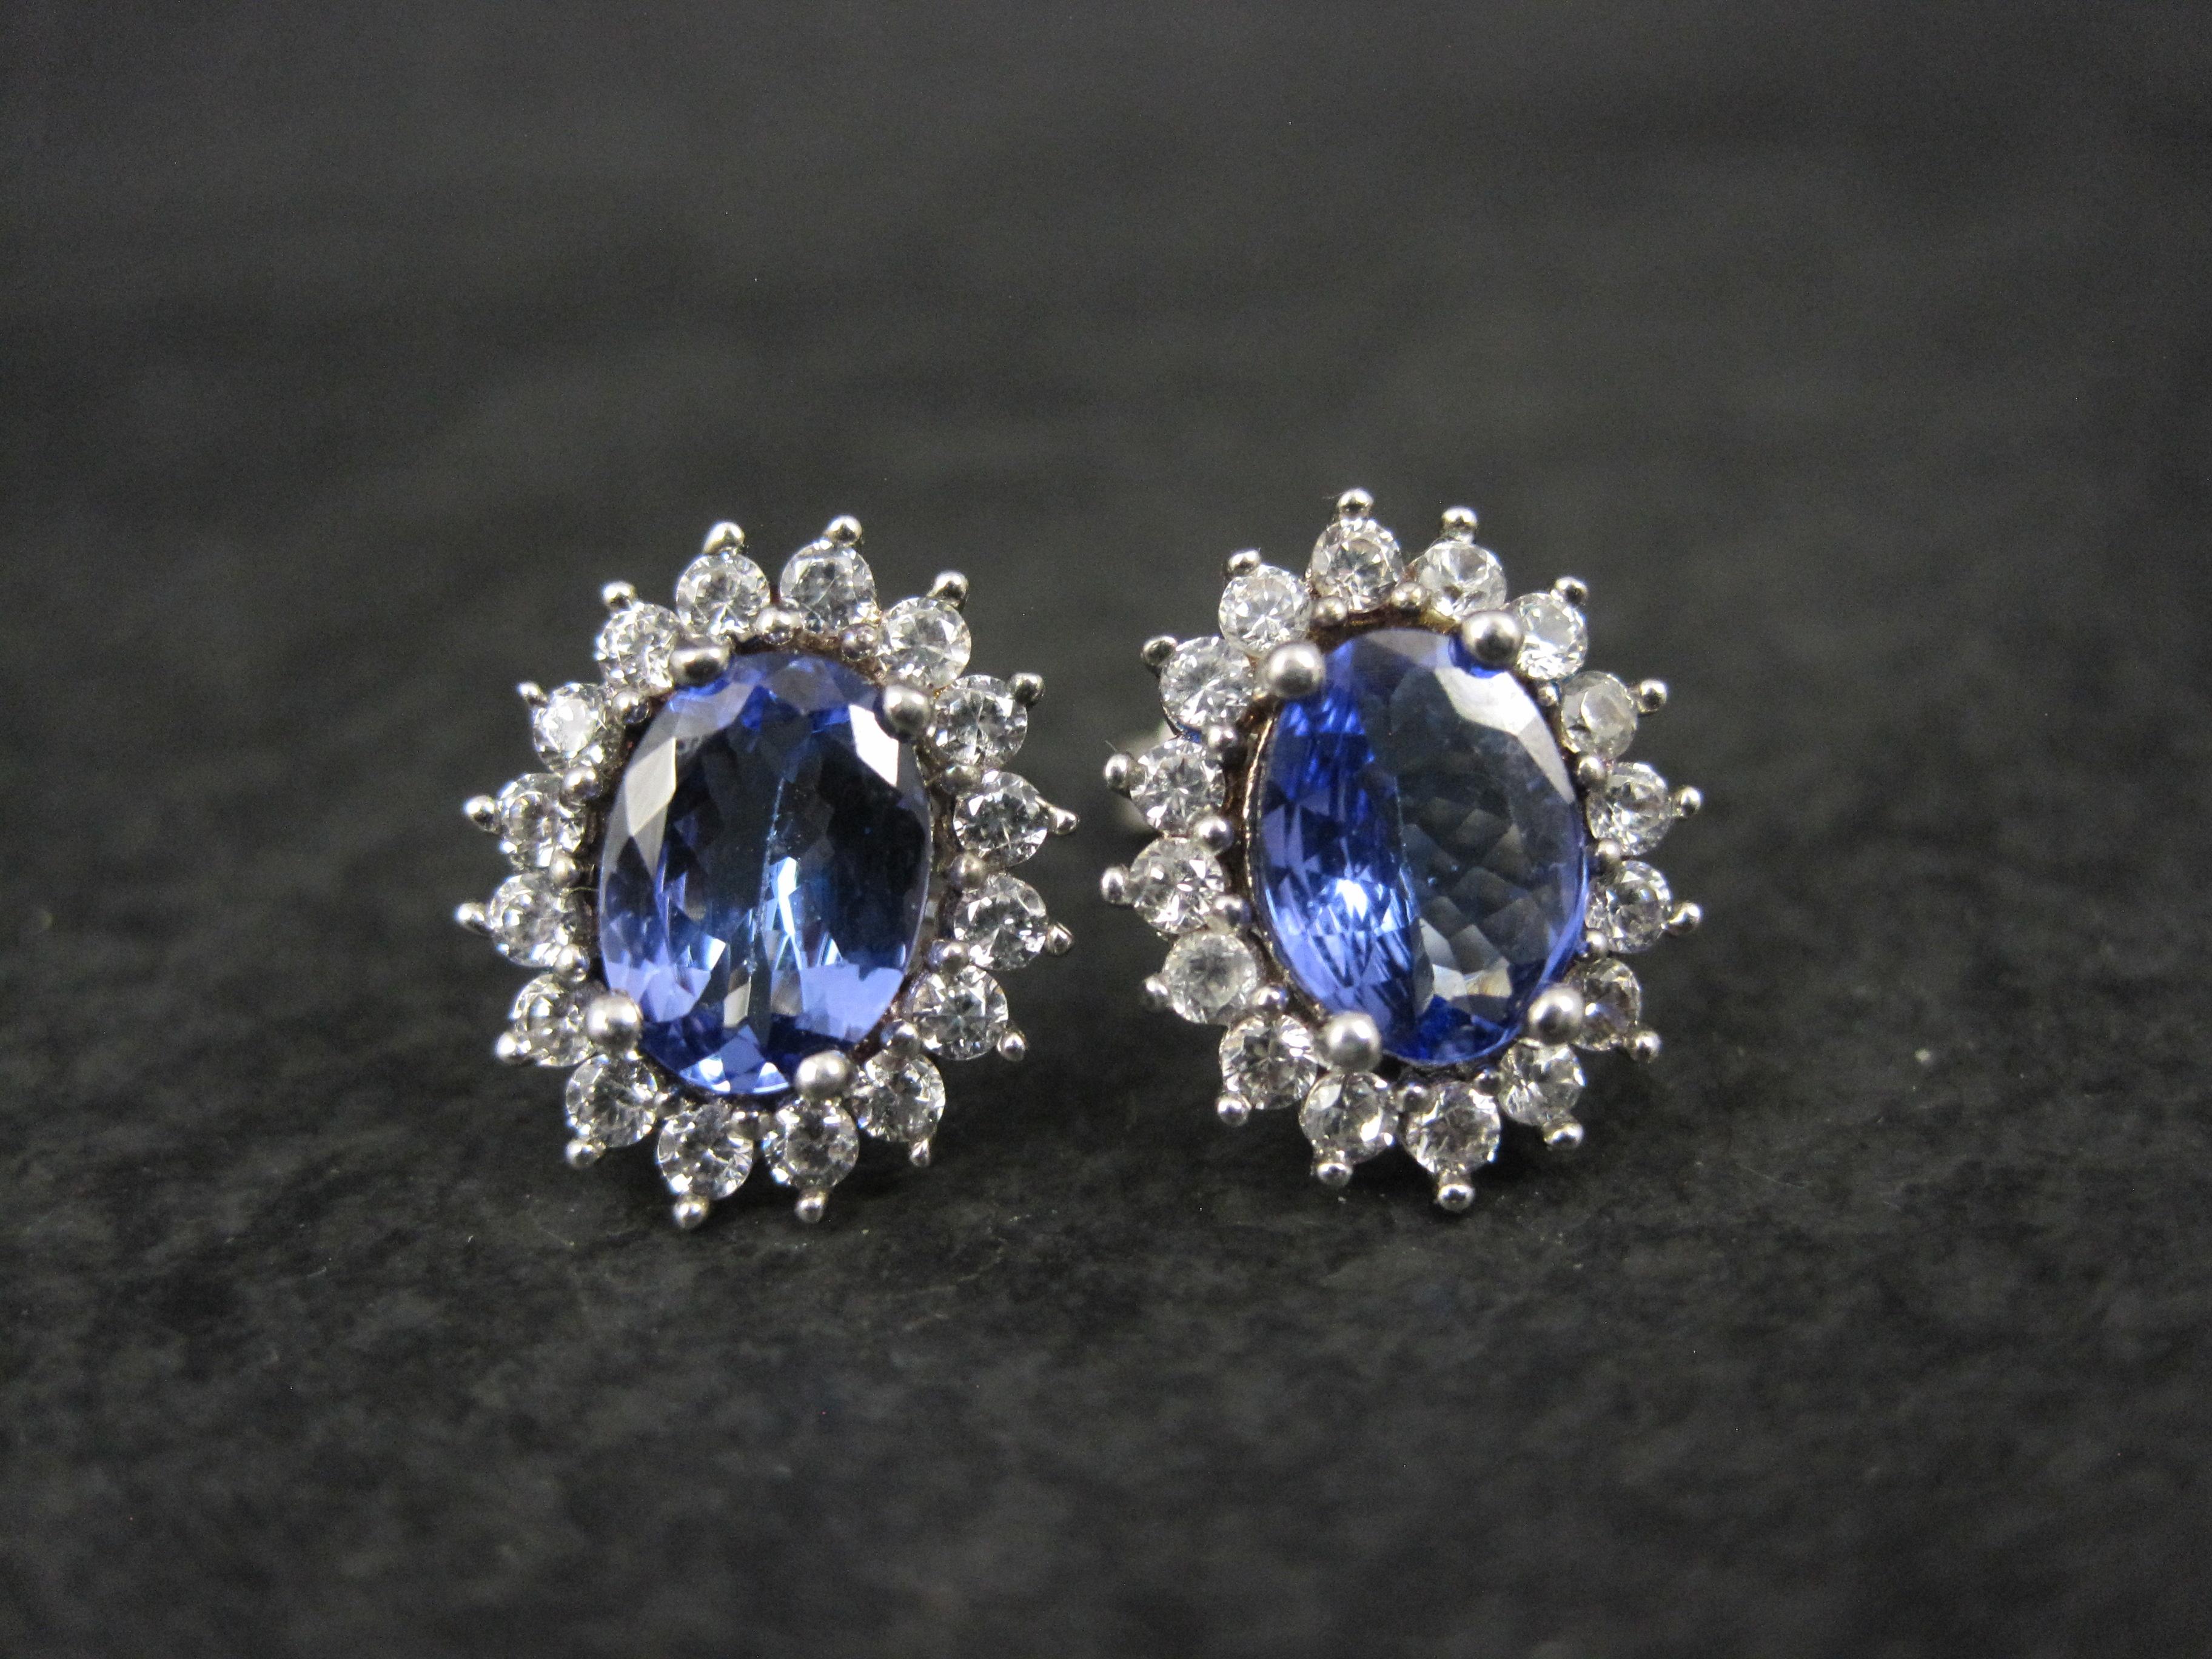 Tanzanite and White Spinel Stud Earrings Sterling Silver In Excellent Condition For Sale In Webster, SD